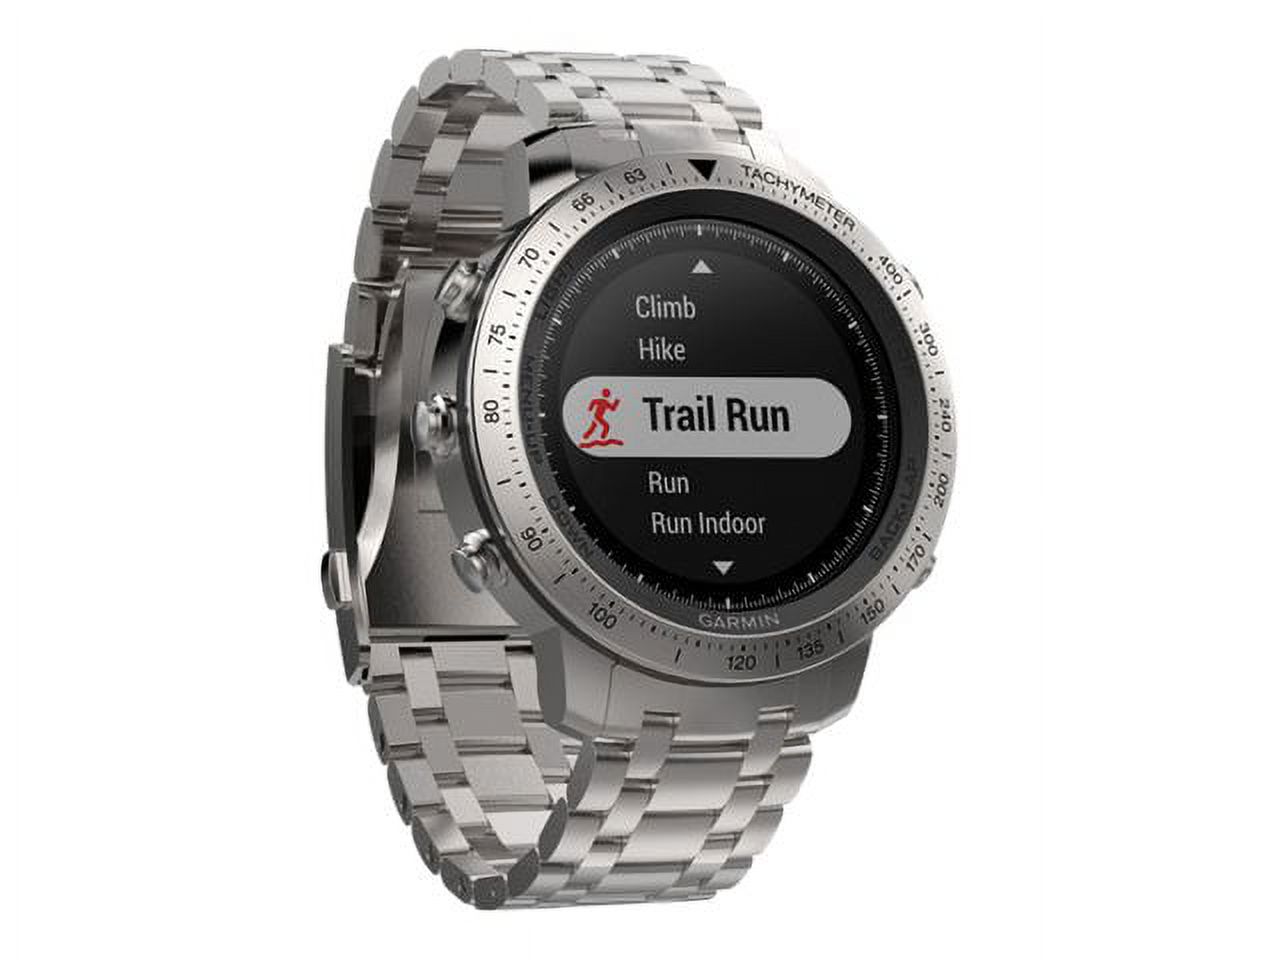 Fenix Chronos GPS Multi Sport Smart Fitness Brushed Stainless Steel Watch - image 2 of 4